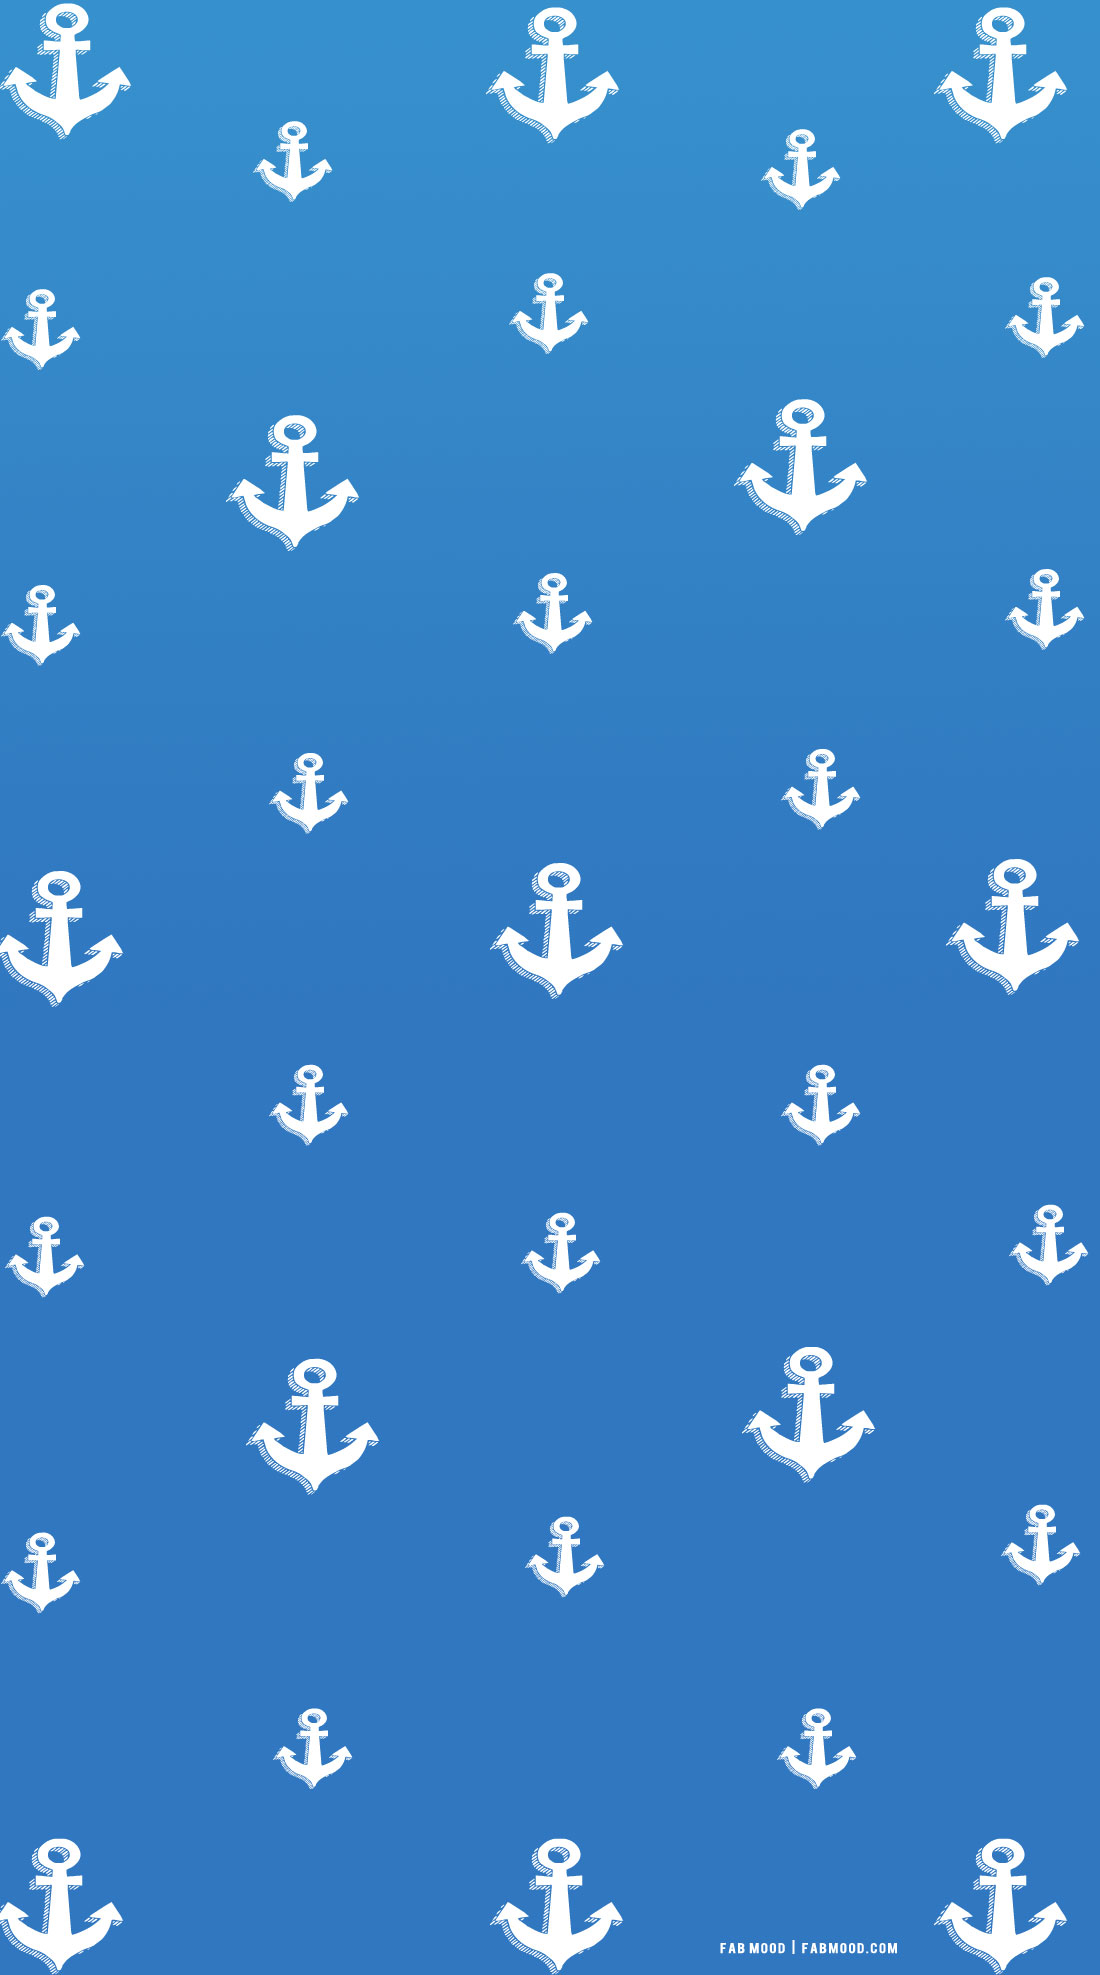 15 Azure Blue Wallpapers For Phone : Ahoy There, Matey! 1 - Fab Mood |  Wedding Colours, Wedding Themes, Wedding colour palettes